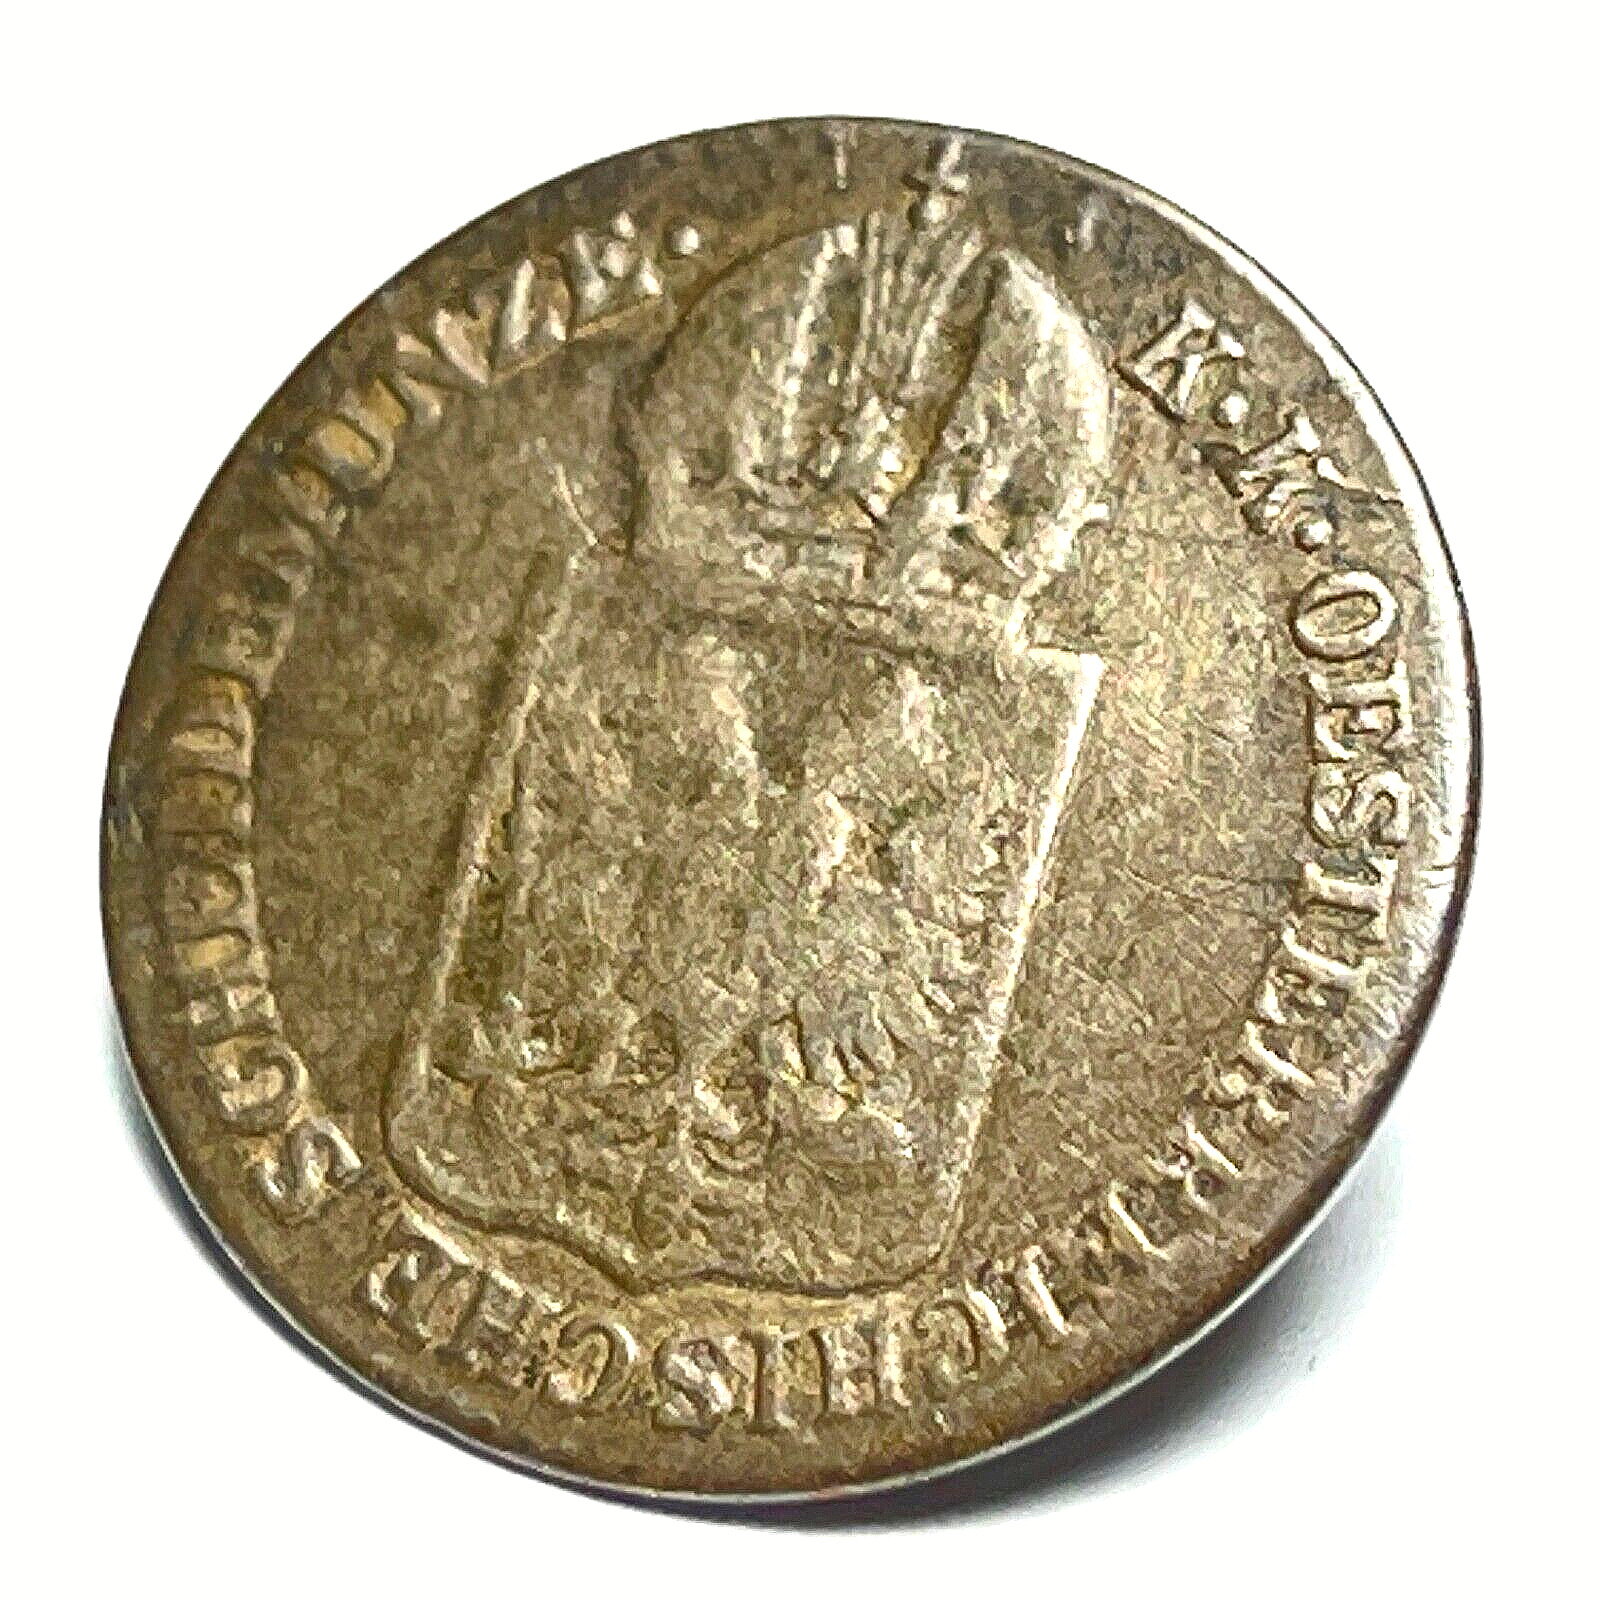 Imperial WWI Austrian coin button from 1849 silver coin